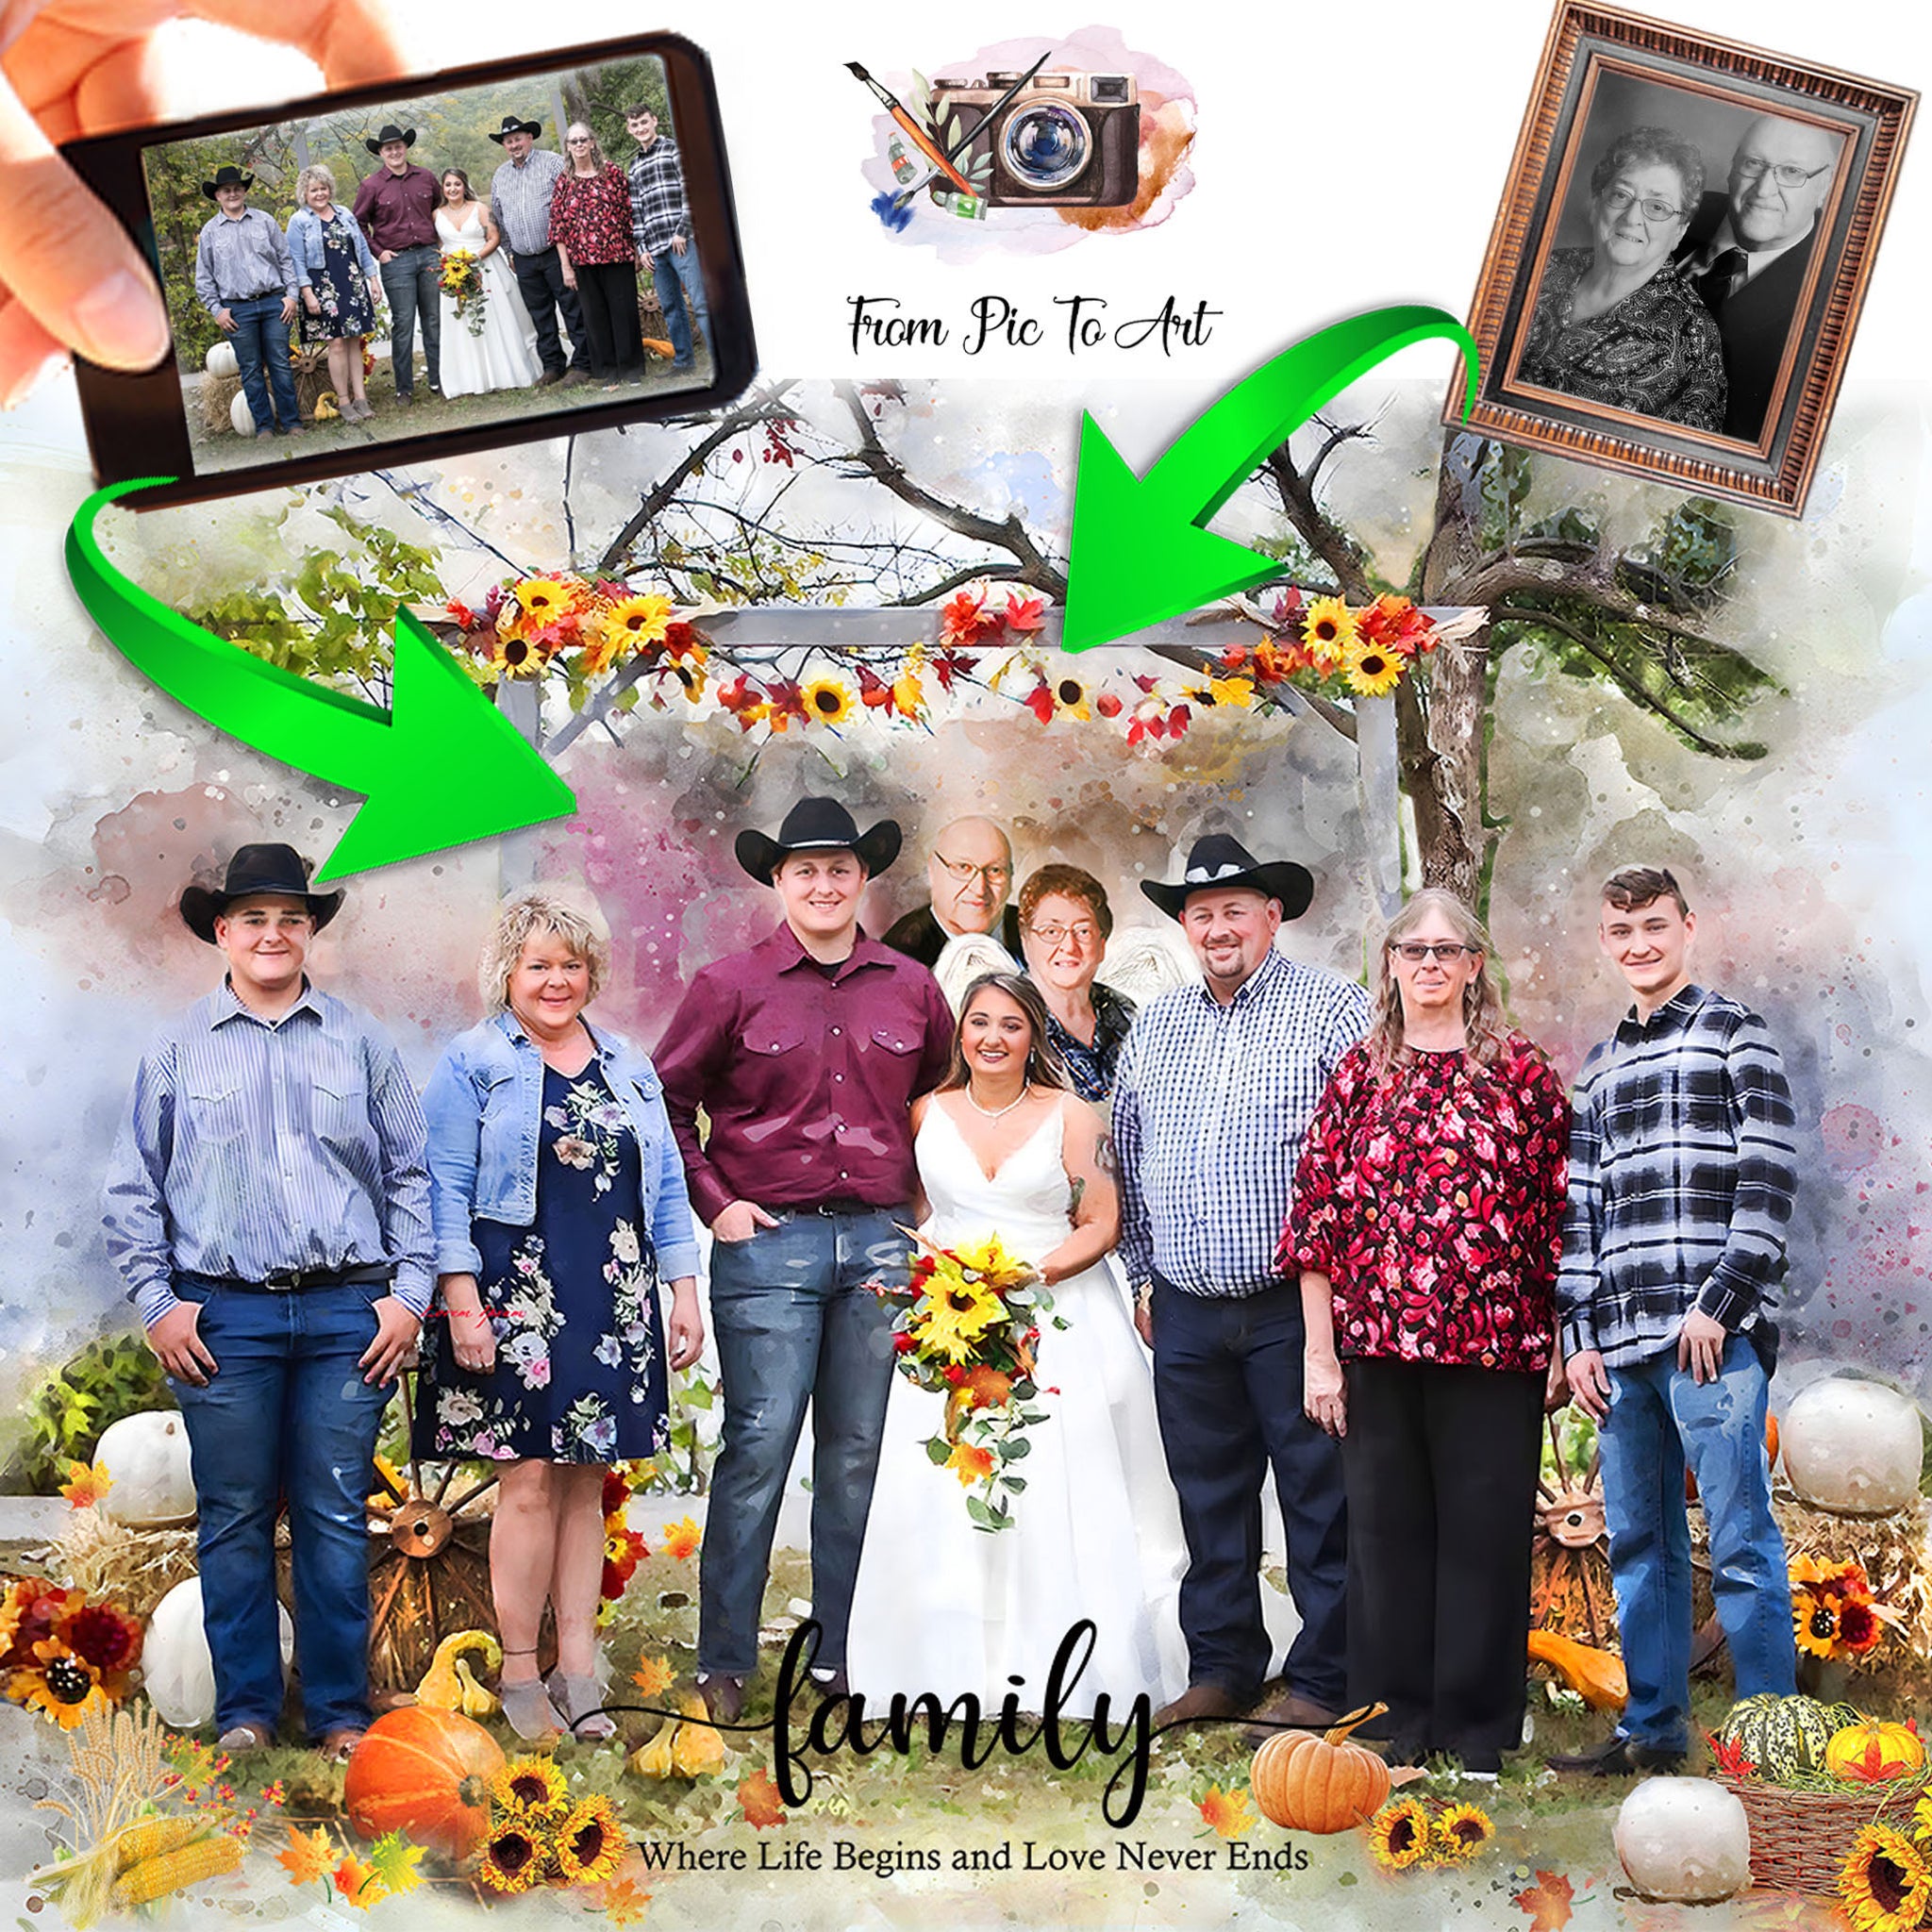 Add Person to Picture, Custom Picture with Deceased Loved One in Background, Add People into a Picture-FromPicToArt